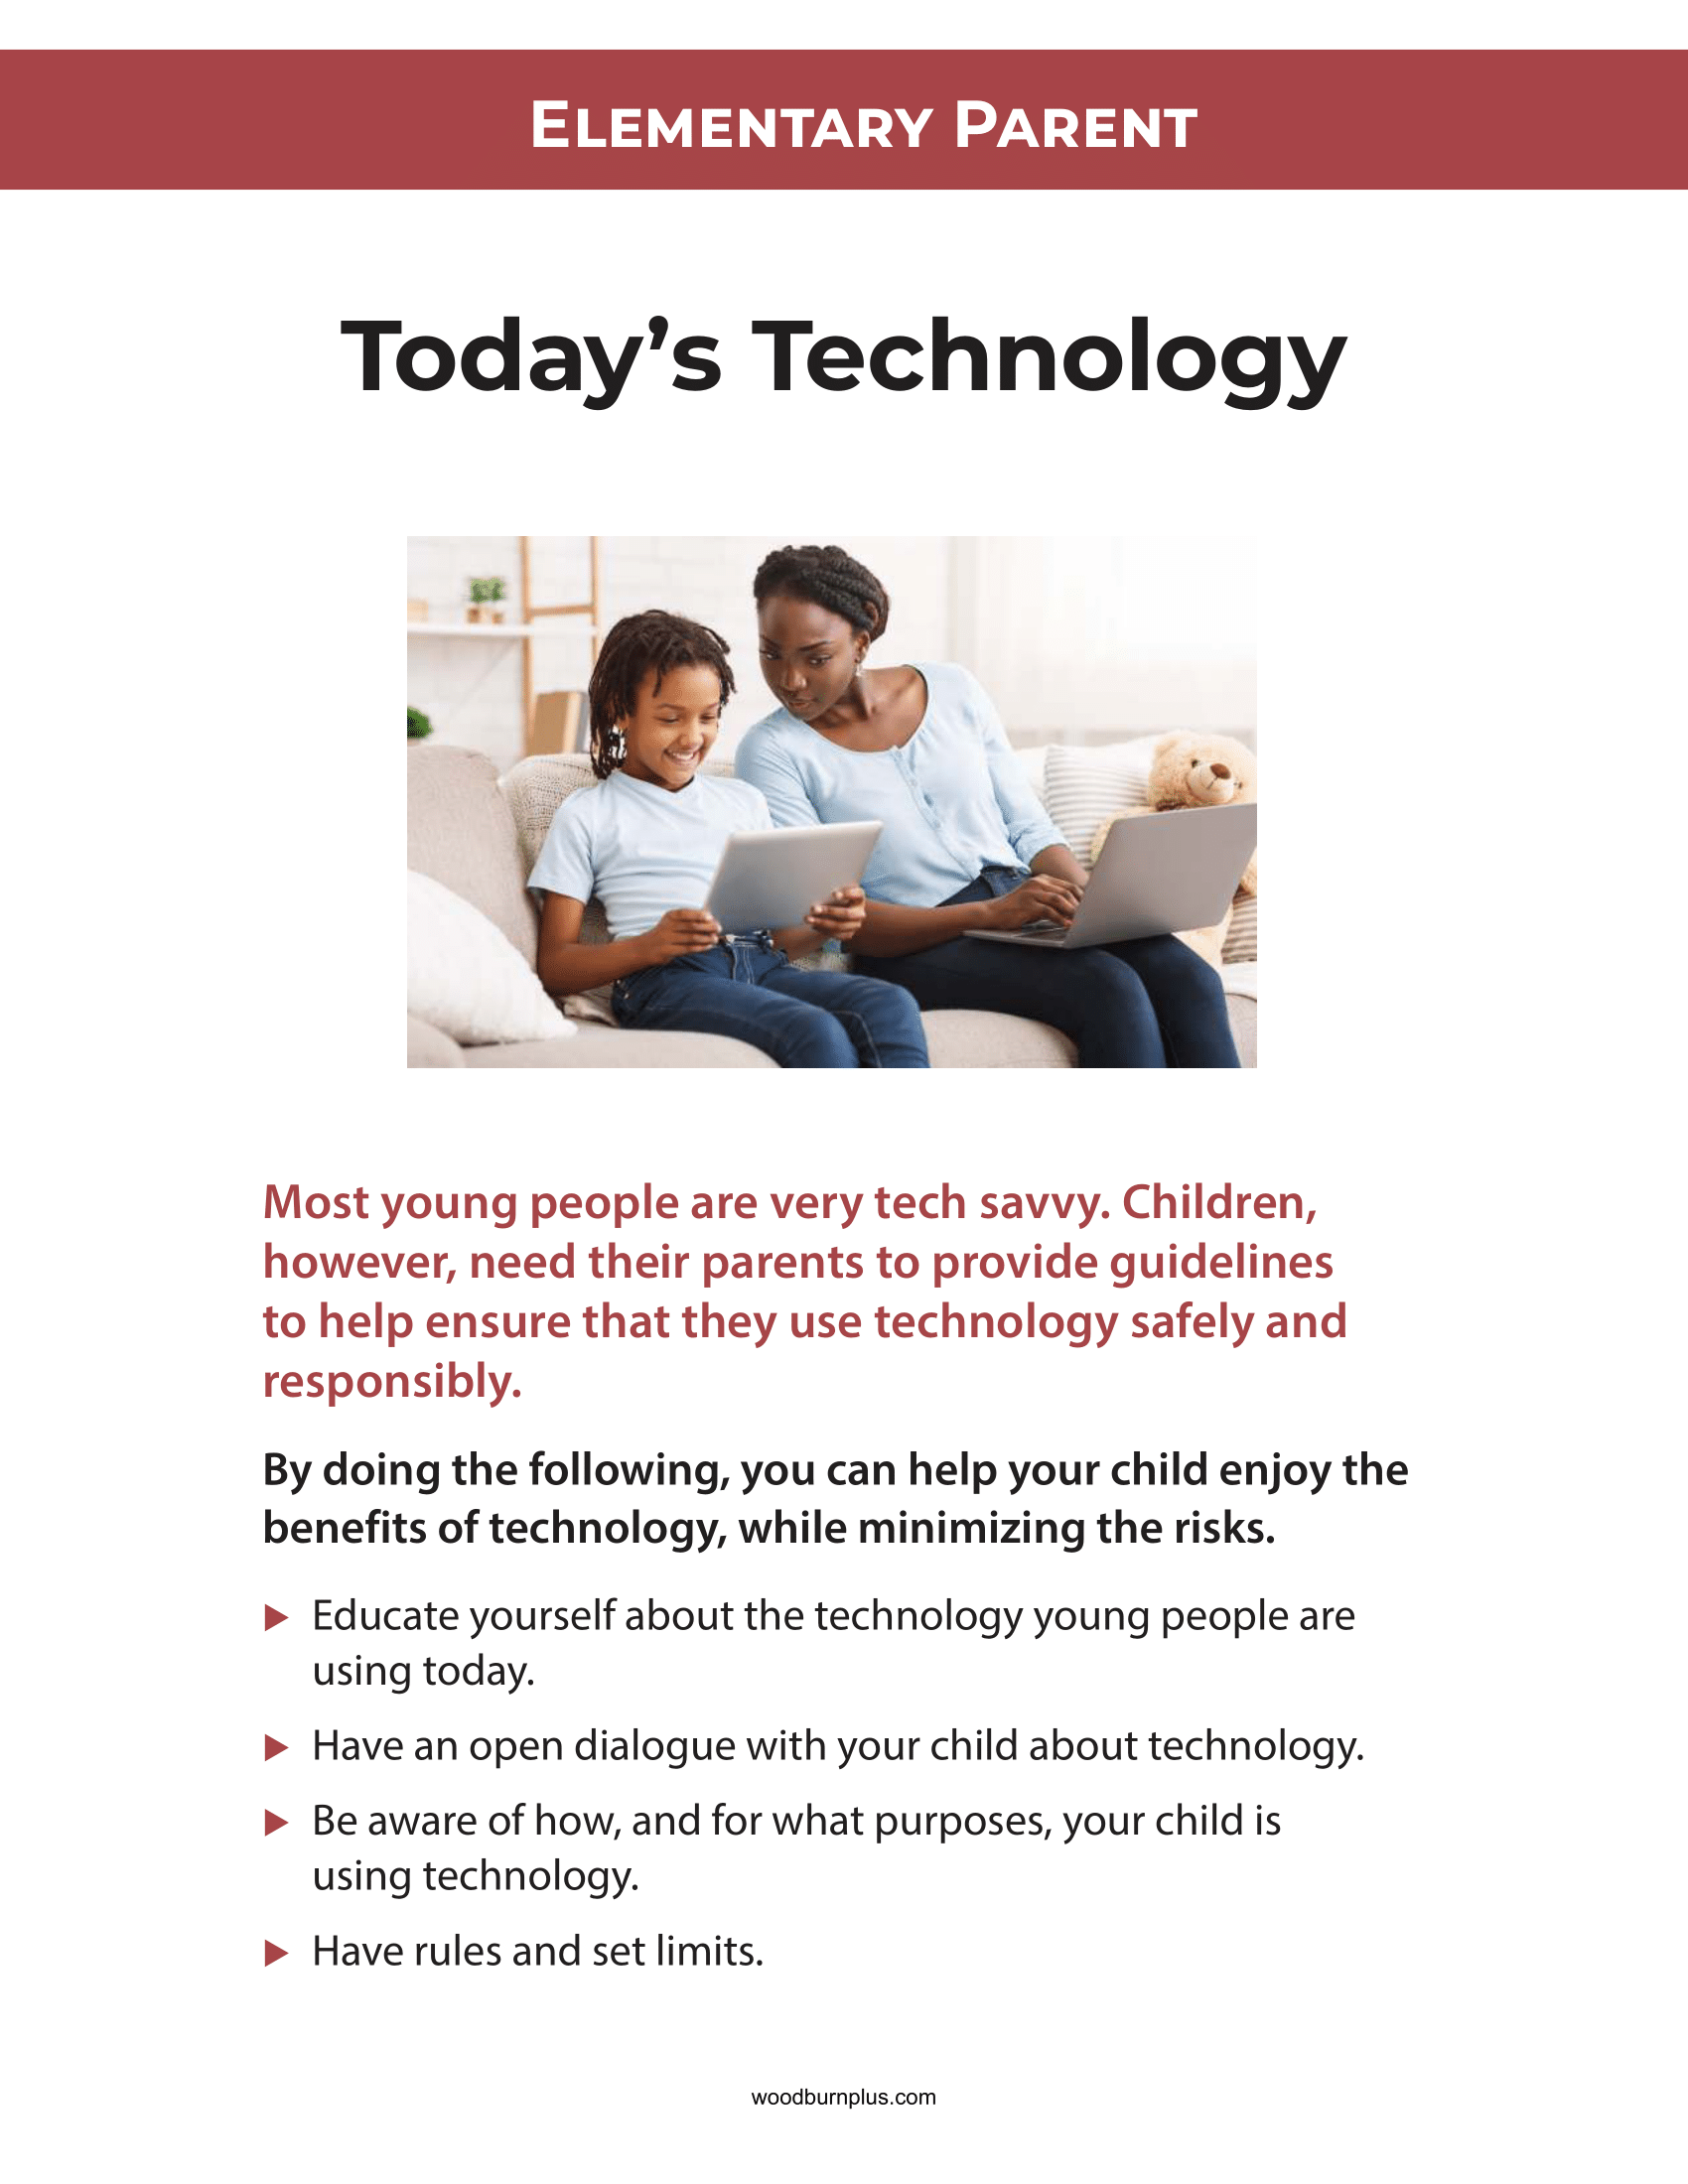 Elementary Parent - Today's Technology